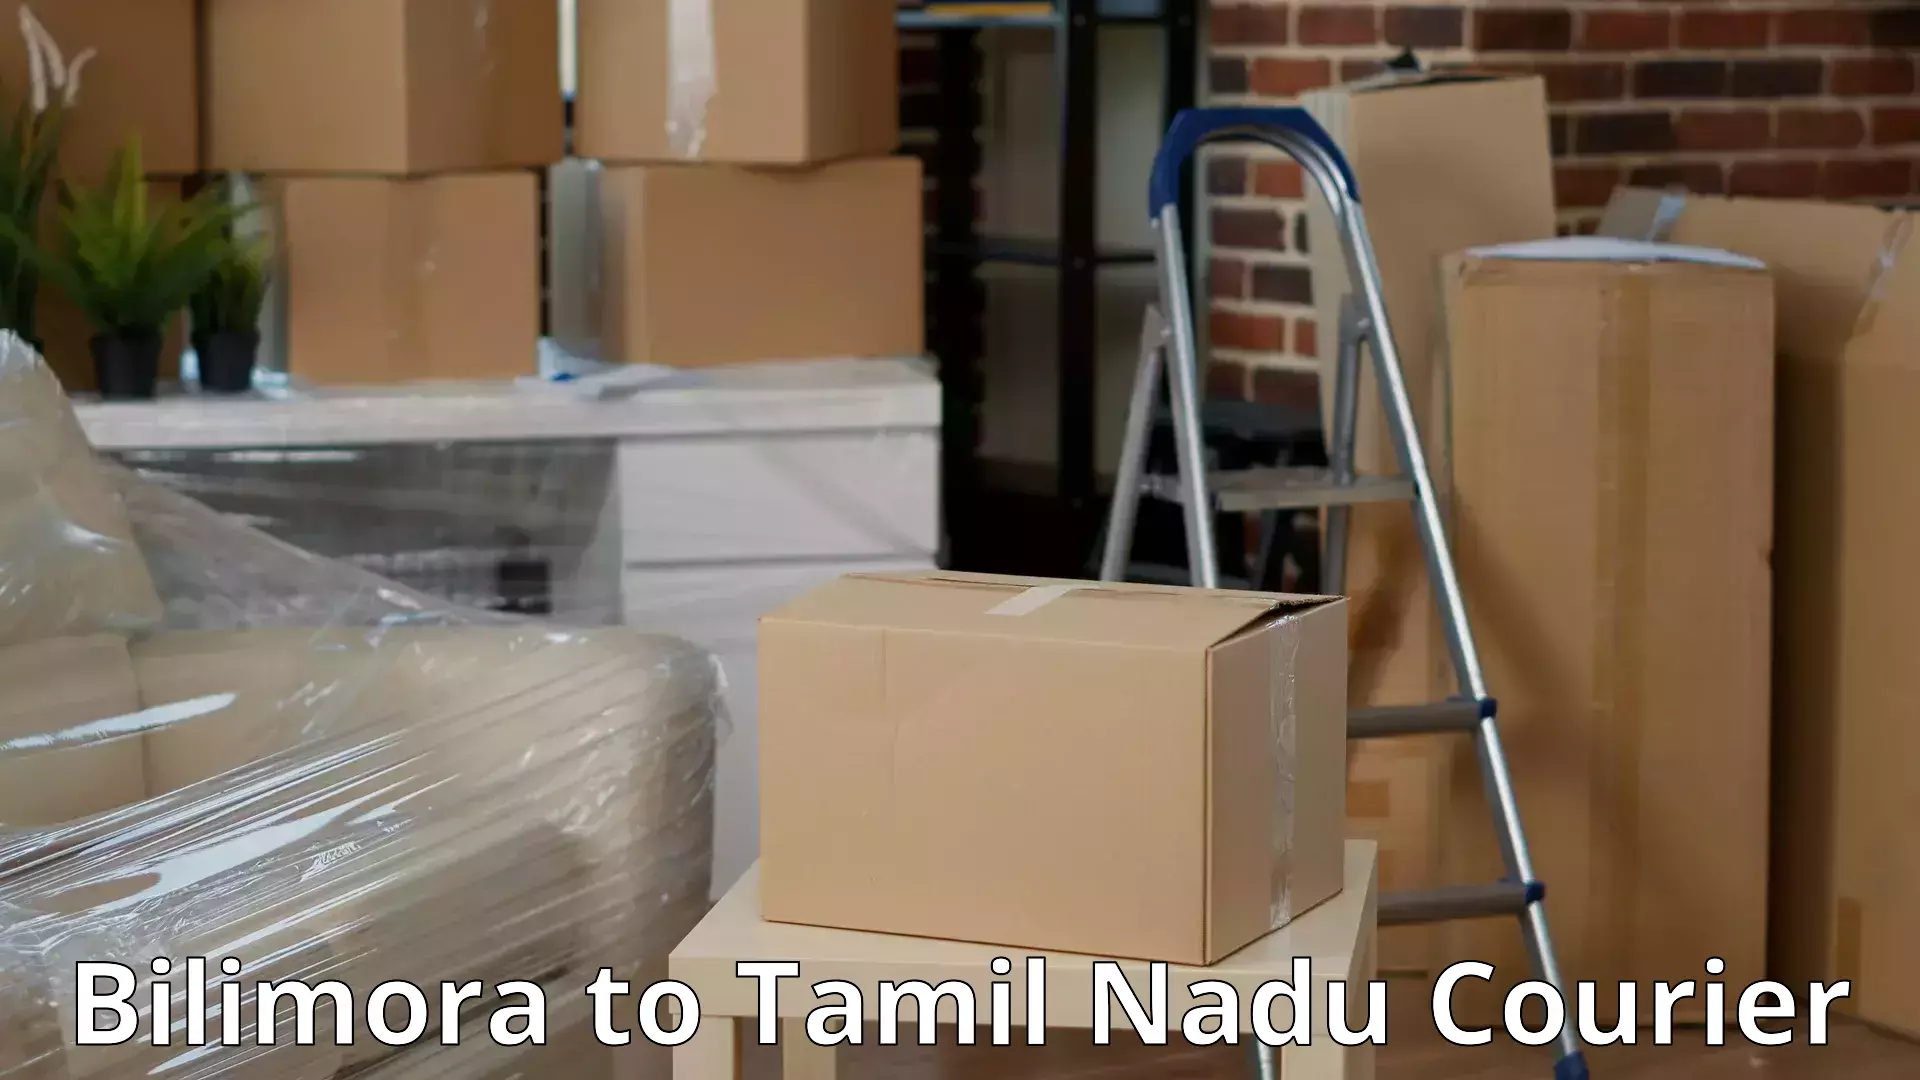 Professional movers and packers in Bilimora to Tirukalukundram